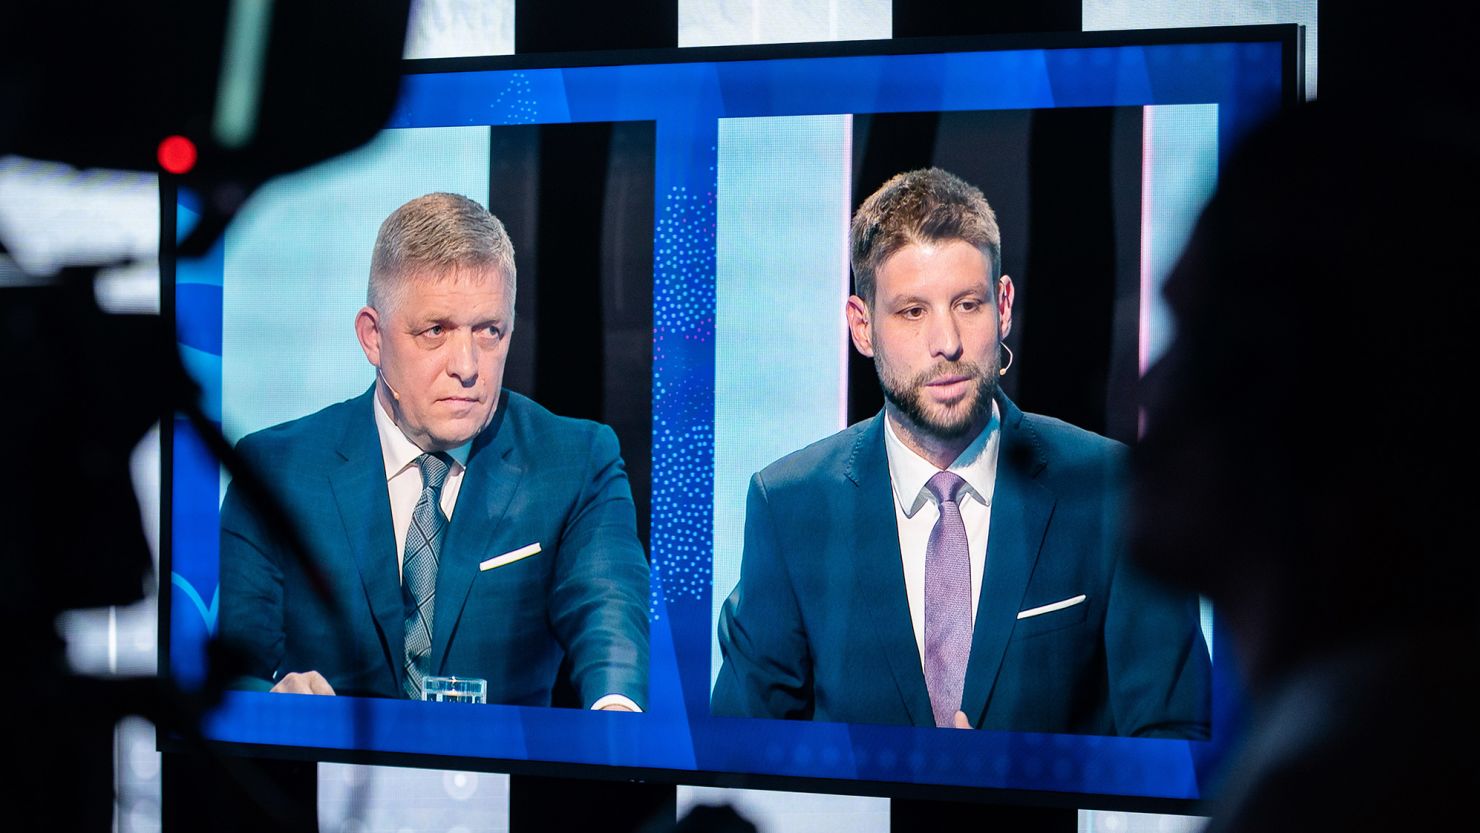 Robert Fico, leader of the SMER party (left) and Progressive Slovakia party leader Michal Šimečka are seen on a TV screen during a televised debate last week.